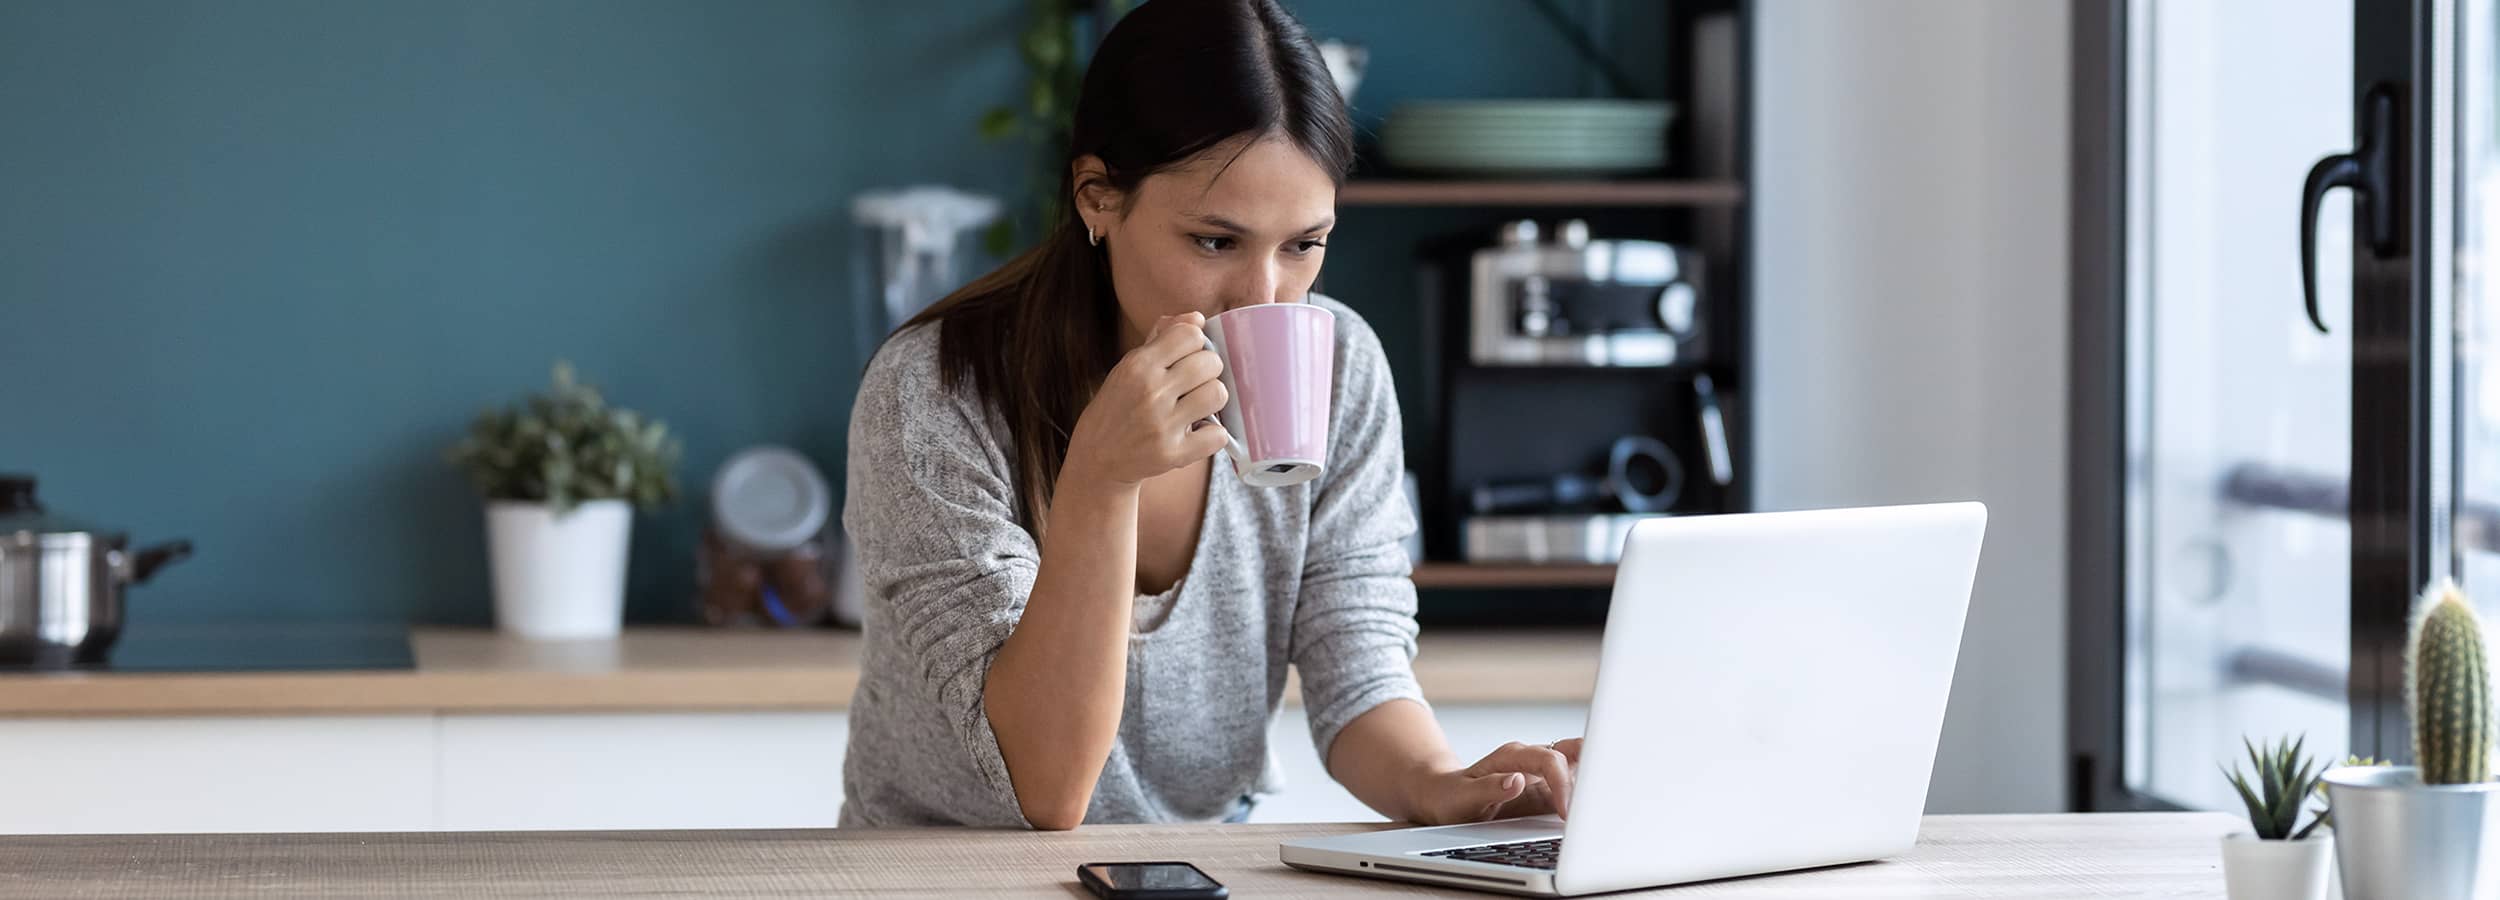 Woman drinking coffee while looking at laptop computer